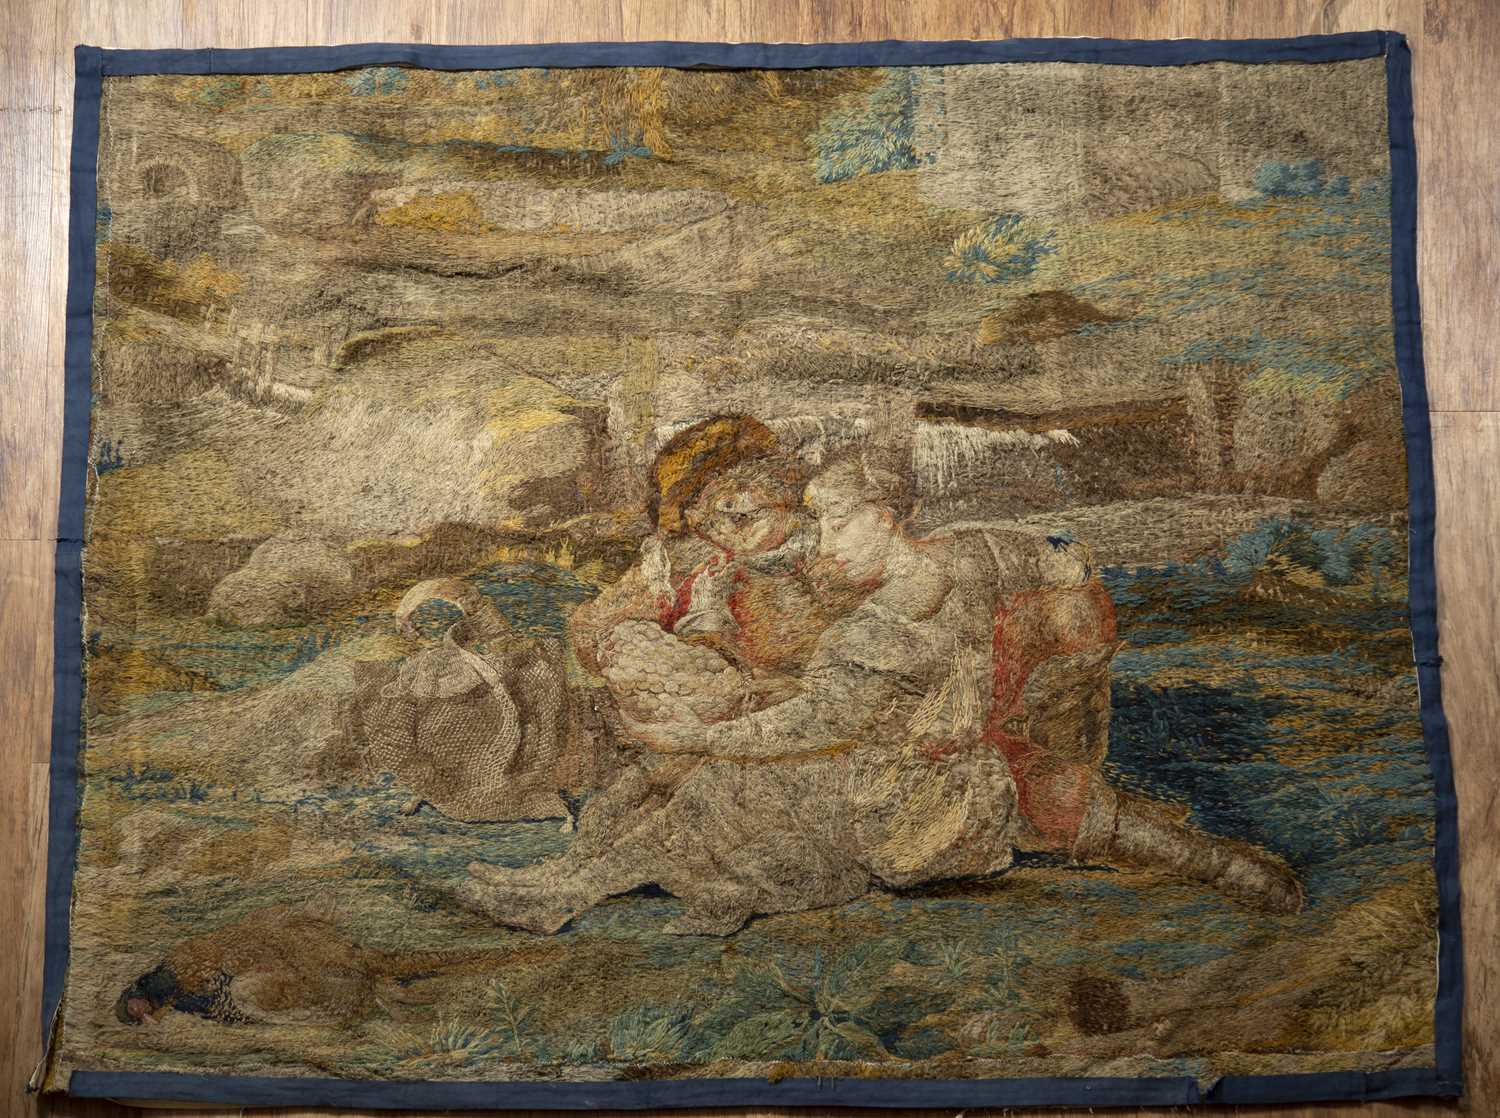 Flemish tapestry 18th Century, depicting a lake landscape with lovers holding a bowl of fruit, 150cm